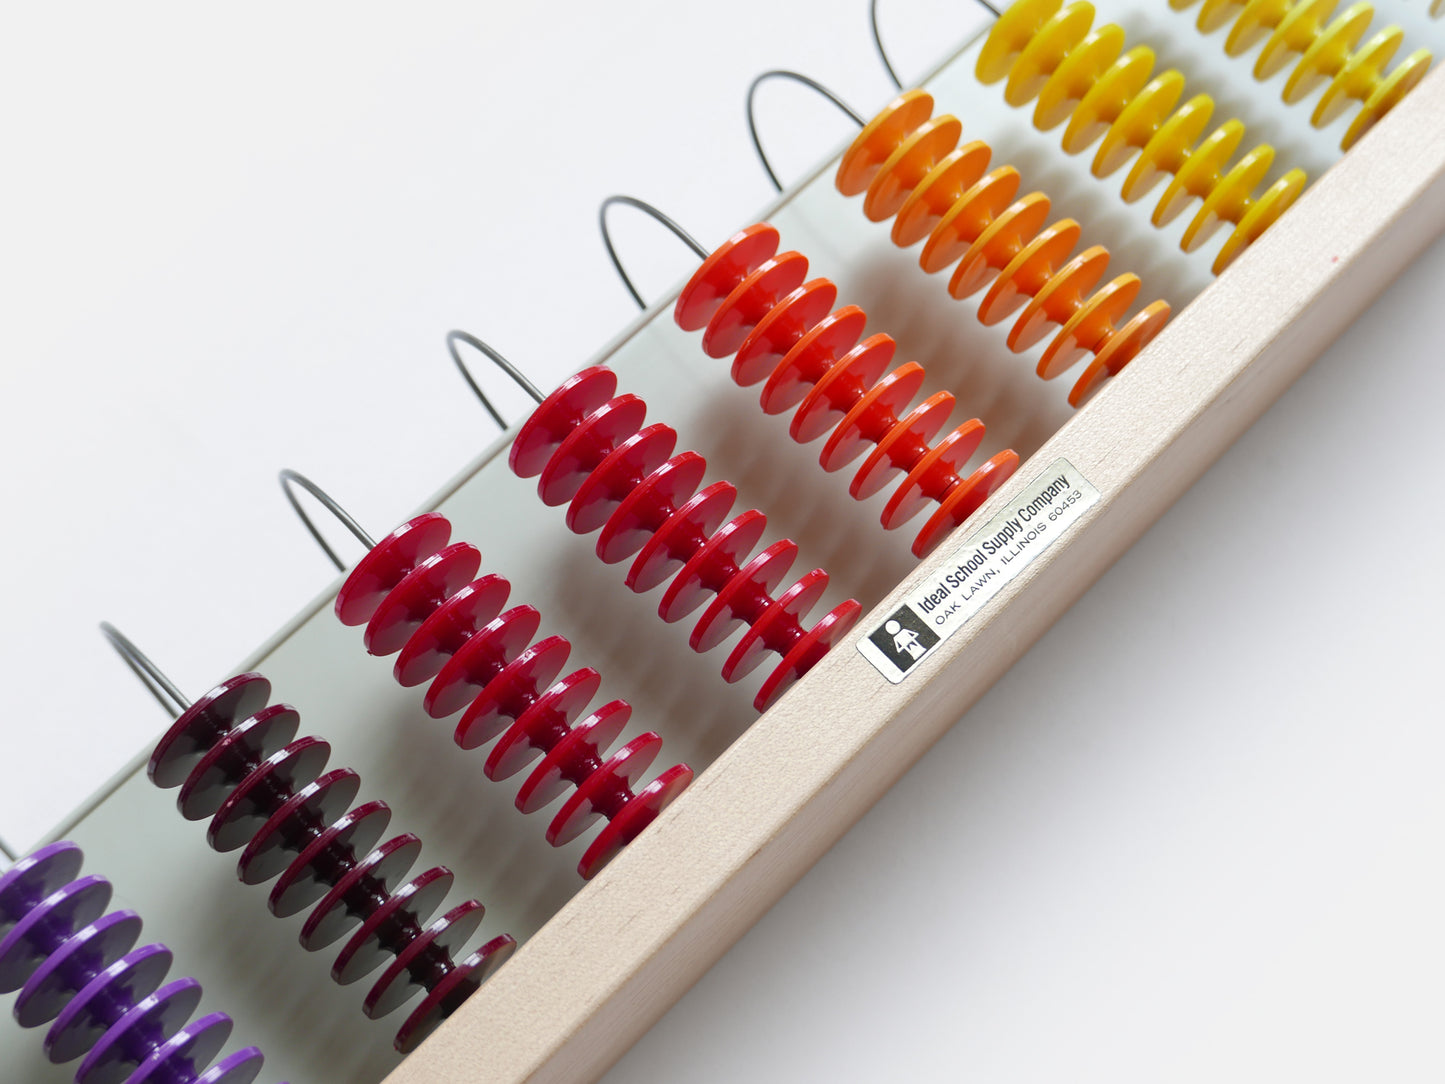 Abacus (1960s)